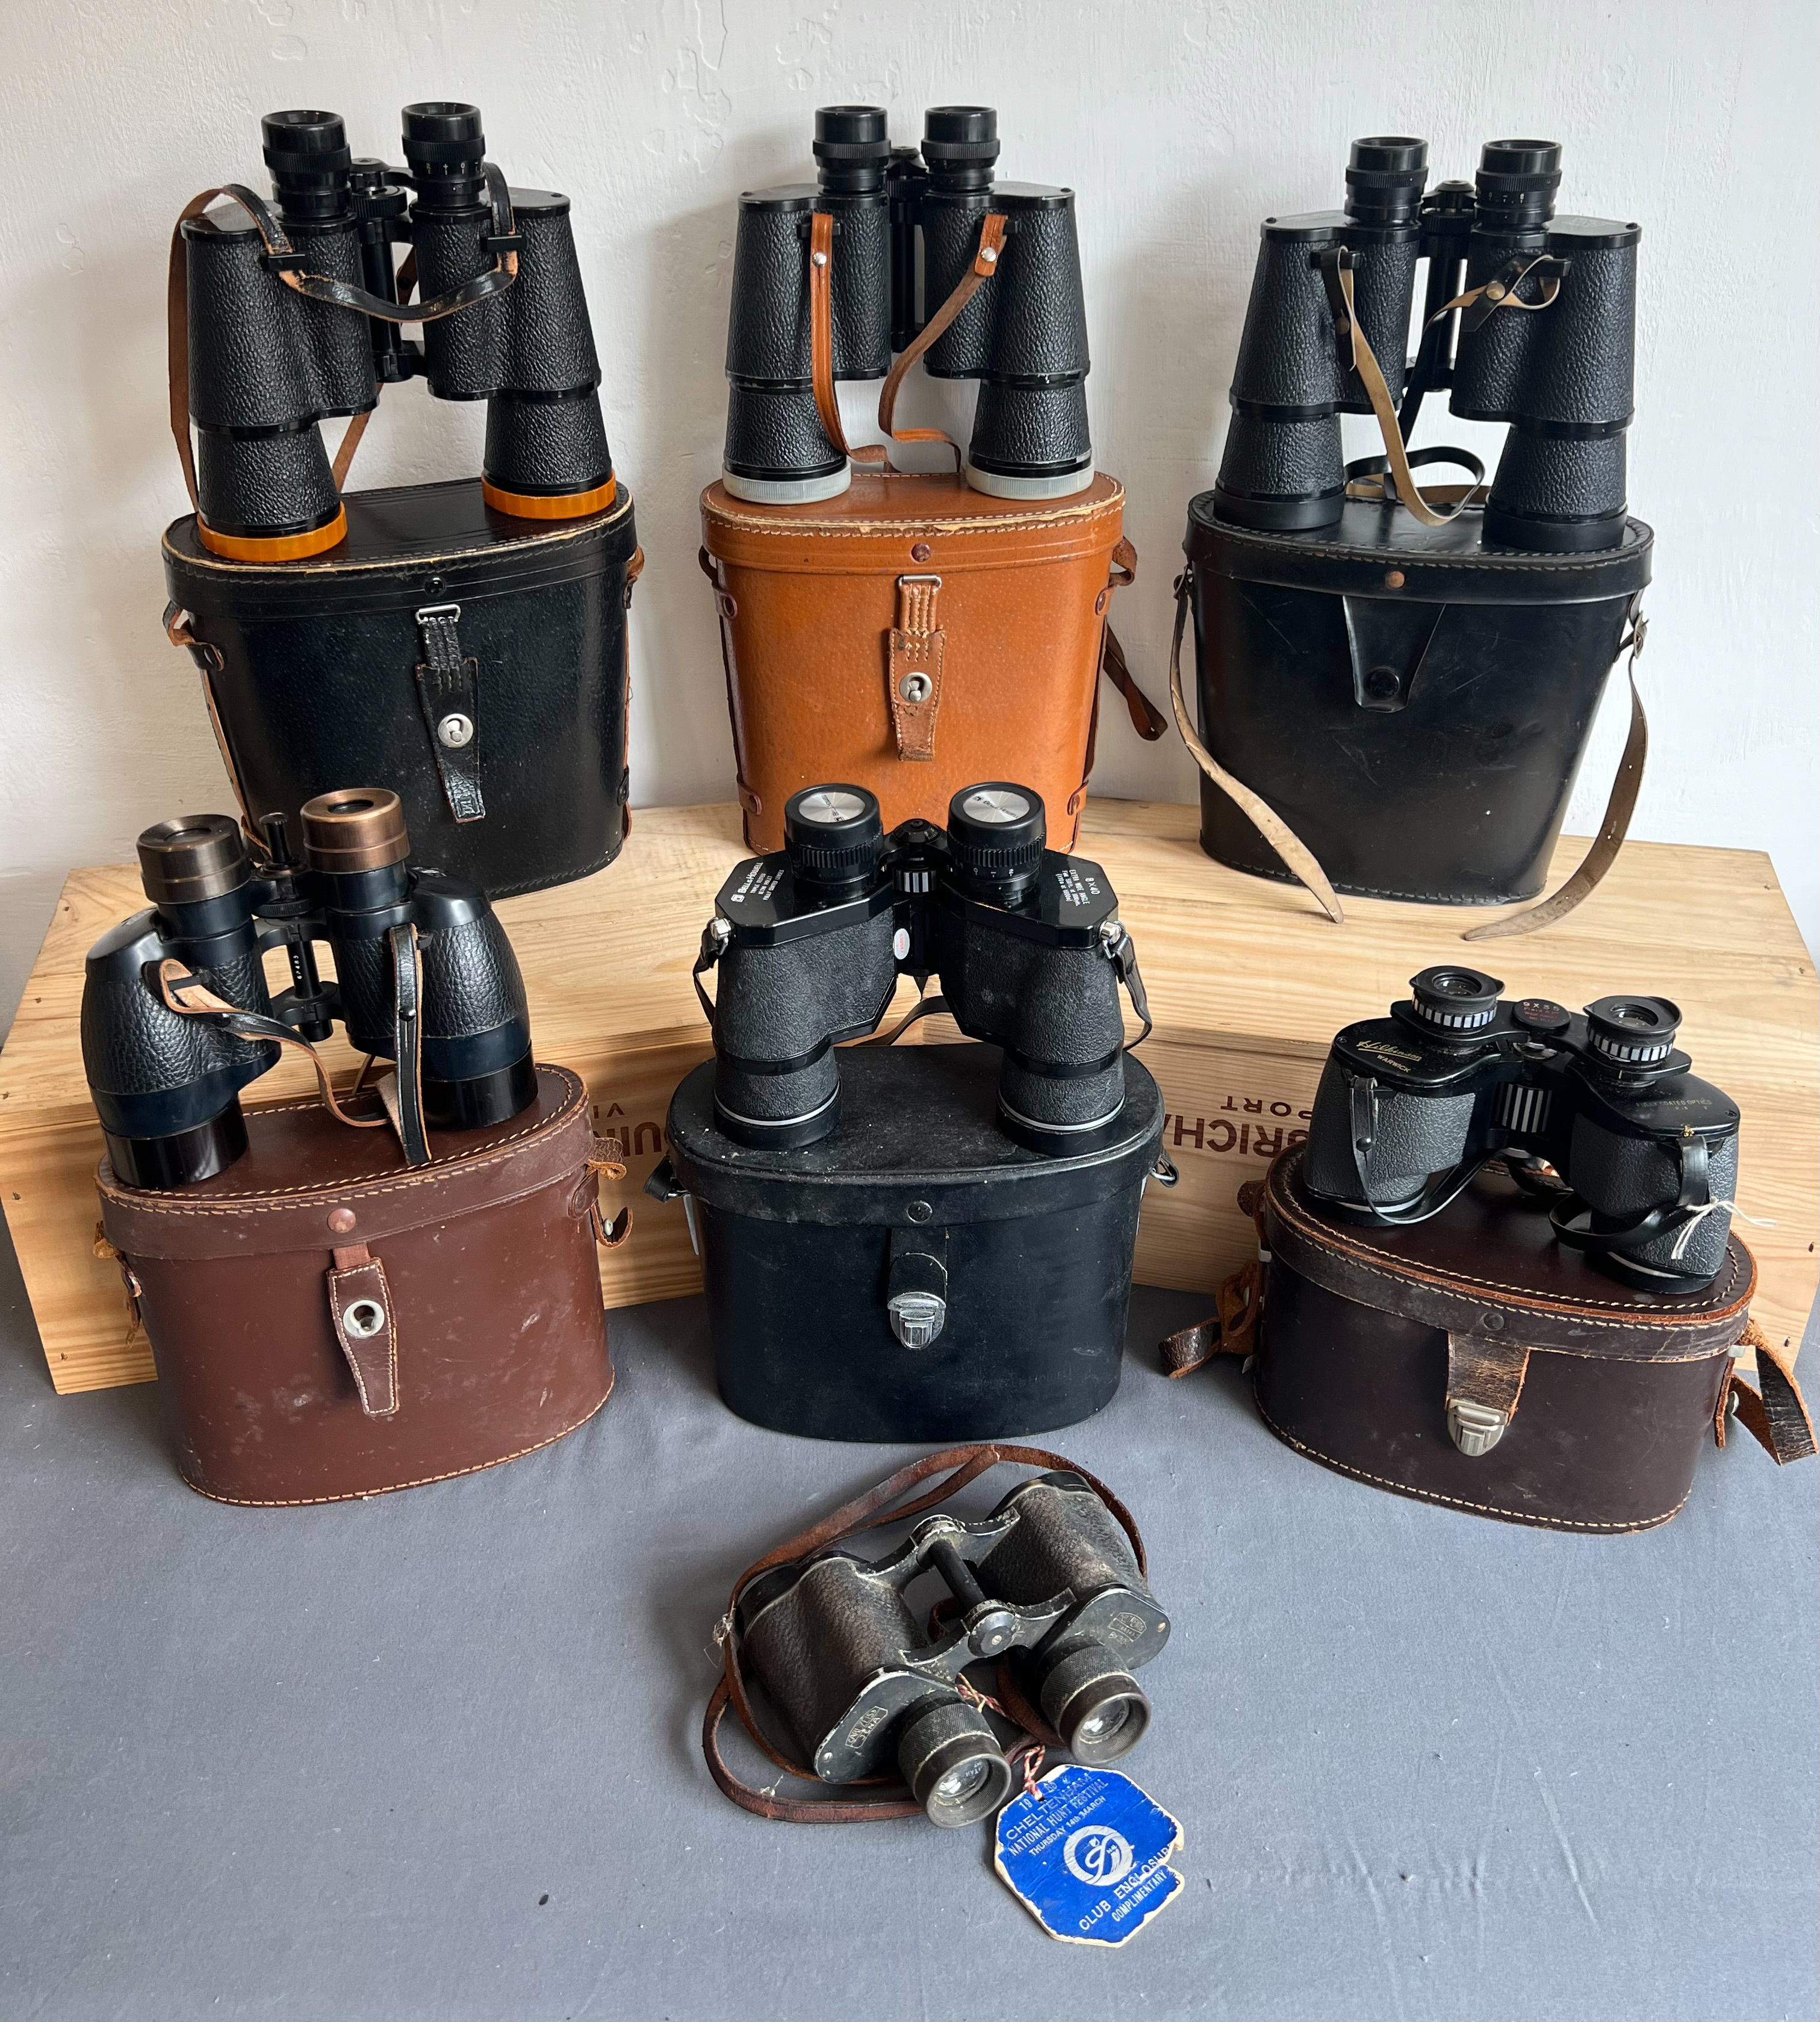 Seven pairs of vintage binoculars (six cased) - including pairs Carl Zeiss Jena (Deltrentis 8x30);